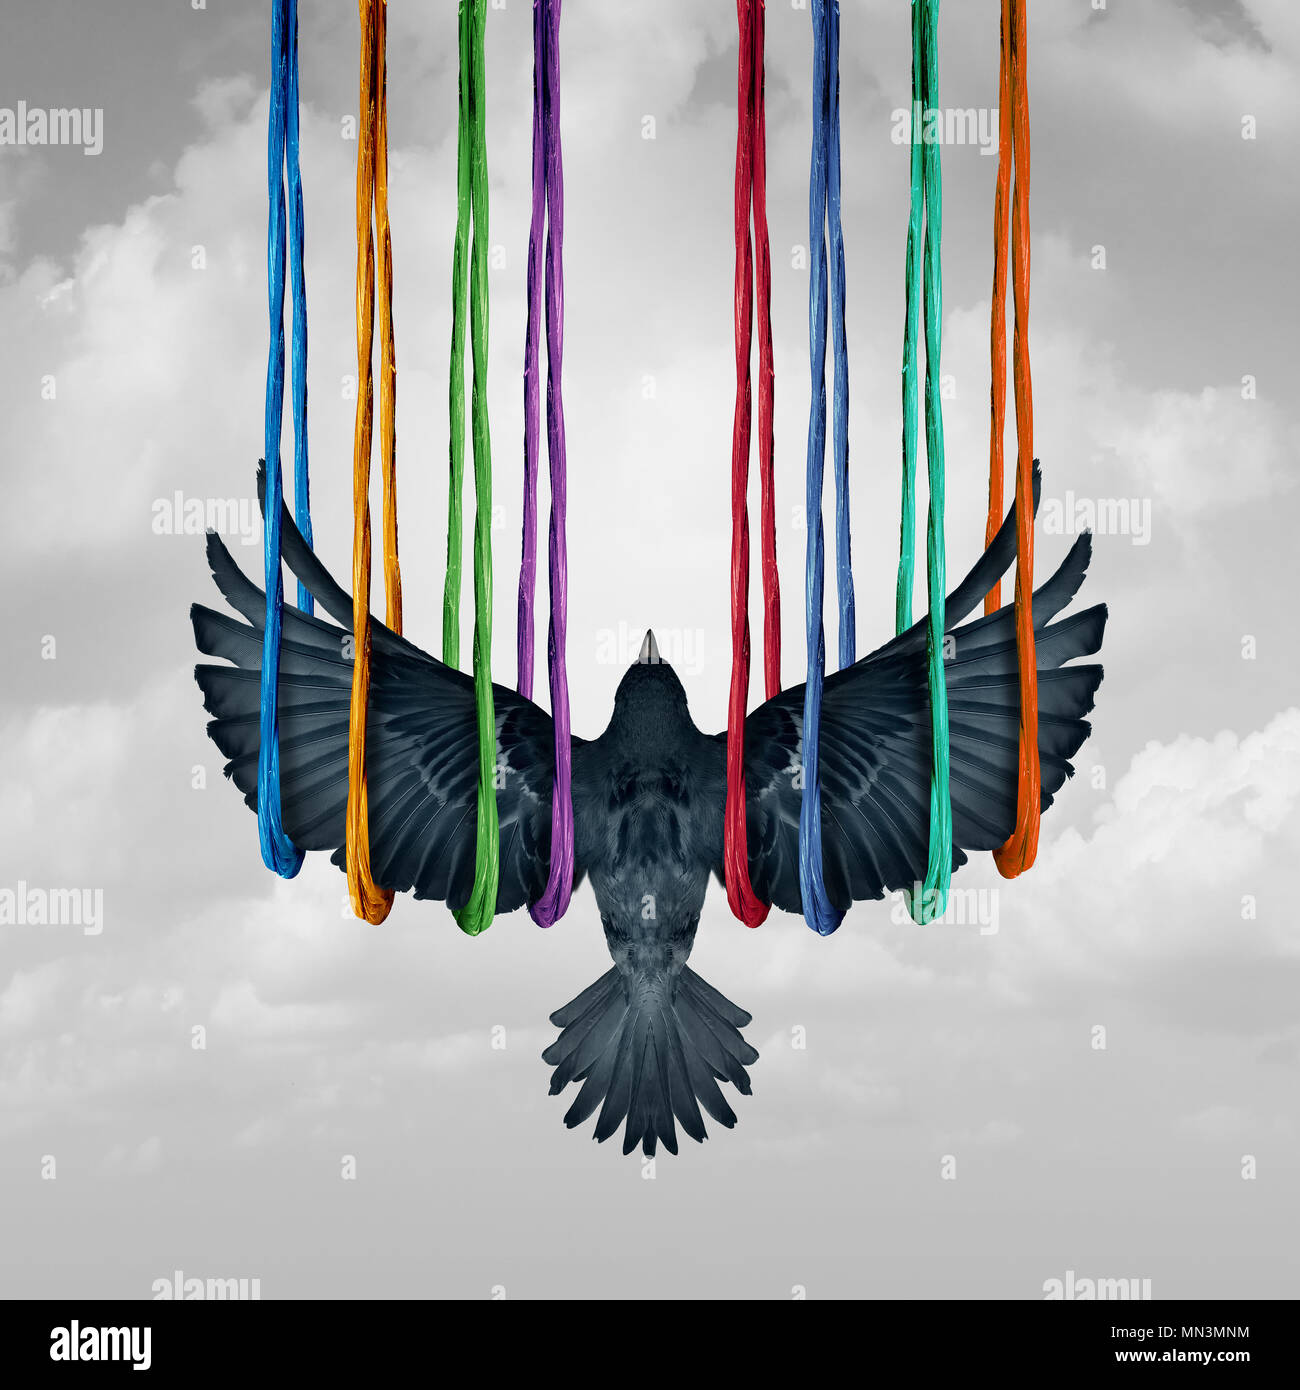 Concept and ideas and support system metaphor as a surreal idea with a bird lifted by a group of diverse ropes in a 3D illustration style. Stock Photo